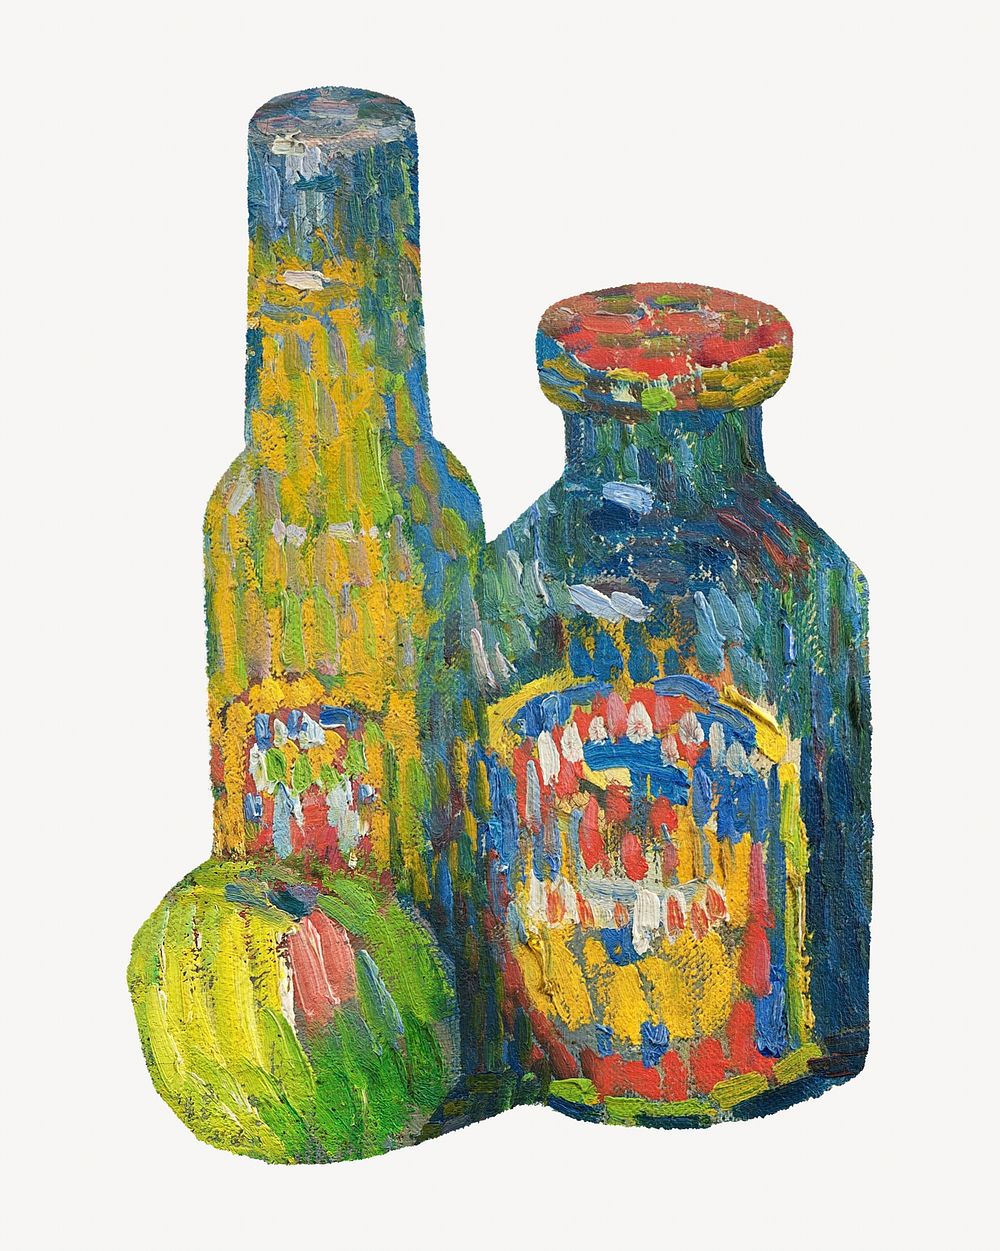 Bottles and Fruit still life, vintage illustration by Alexej von Jawlensky.. Remixed by rawpixel.